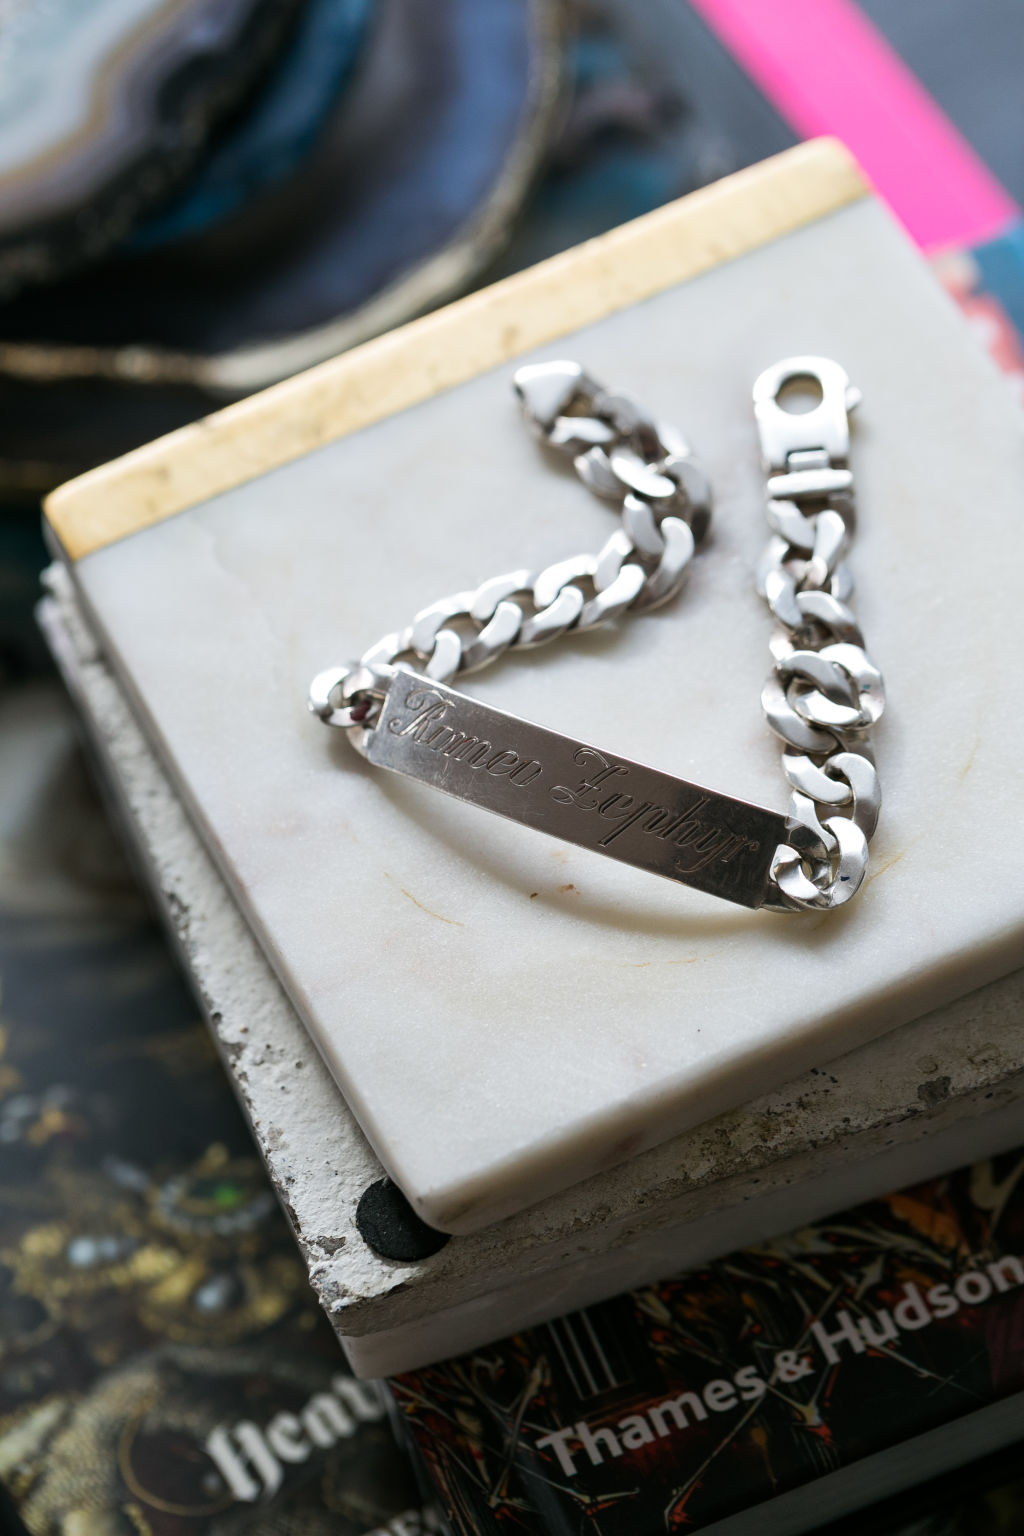 Adnate's wife Jess had this bracelet made for him after the birth of their son. Photo: Parker Blain.